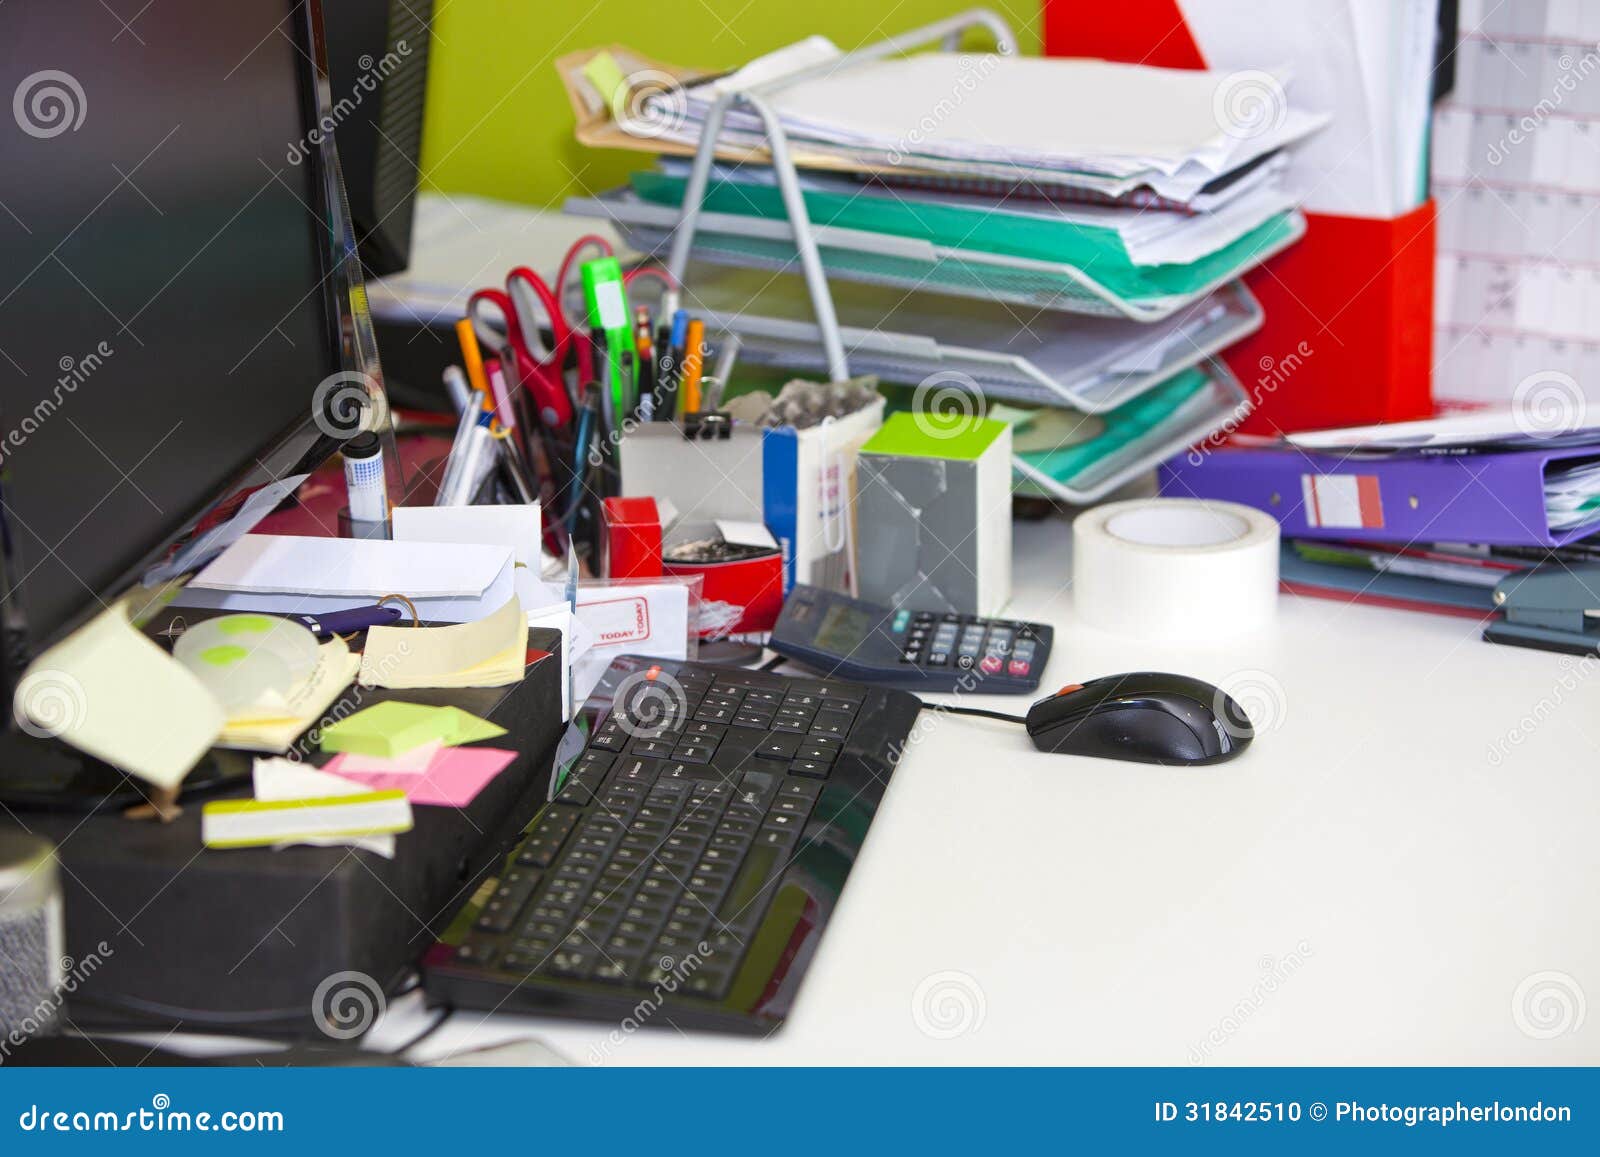 close-up of real life messy desk in office